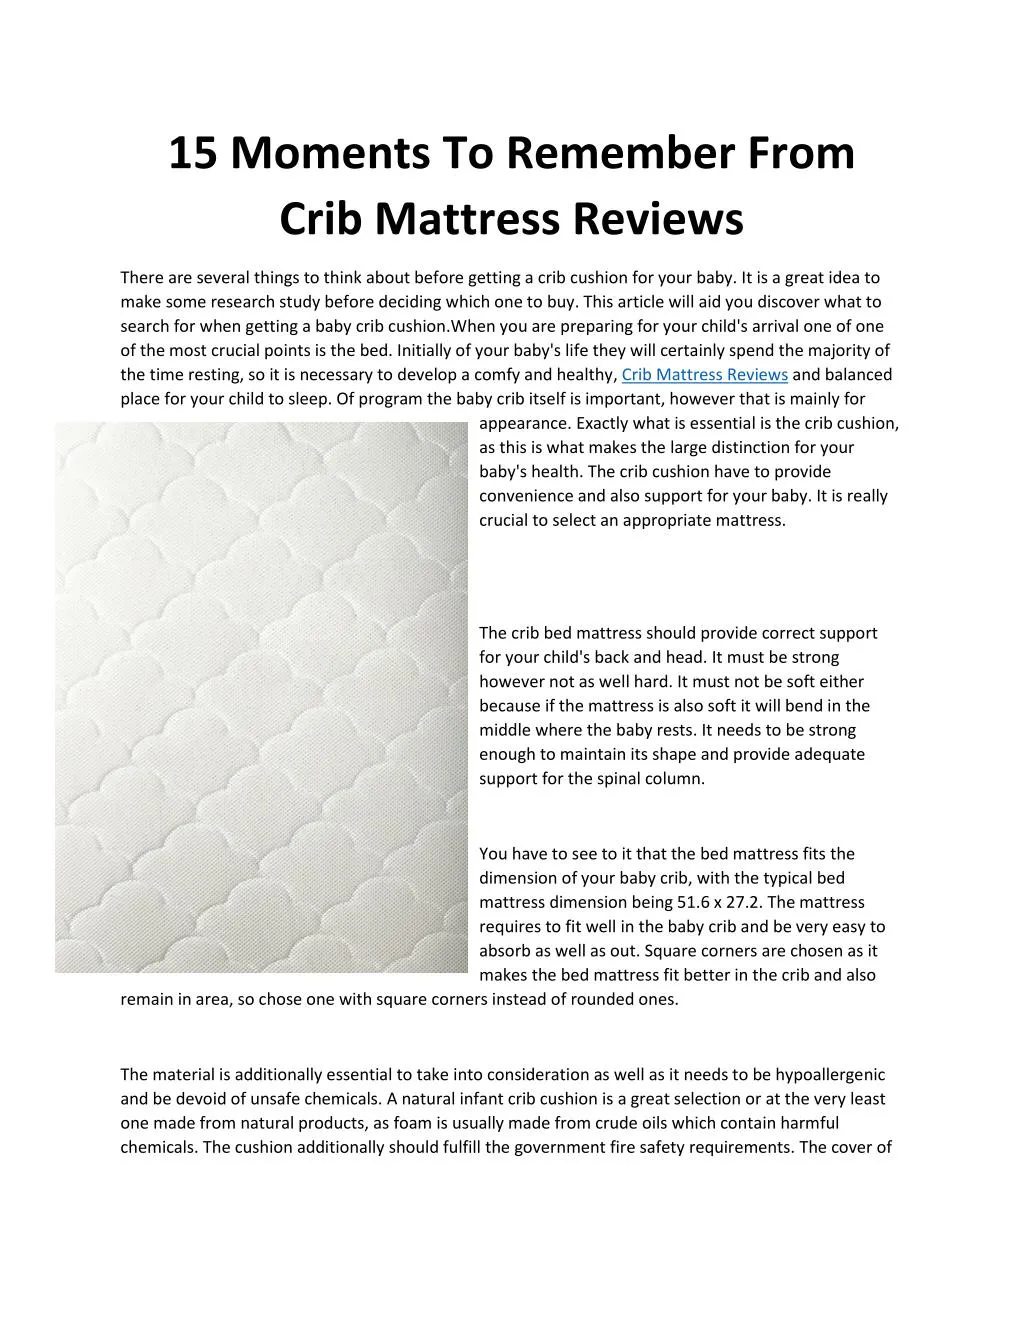 15 moments to remember from crib mattress reviews